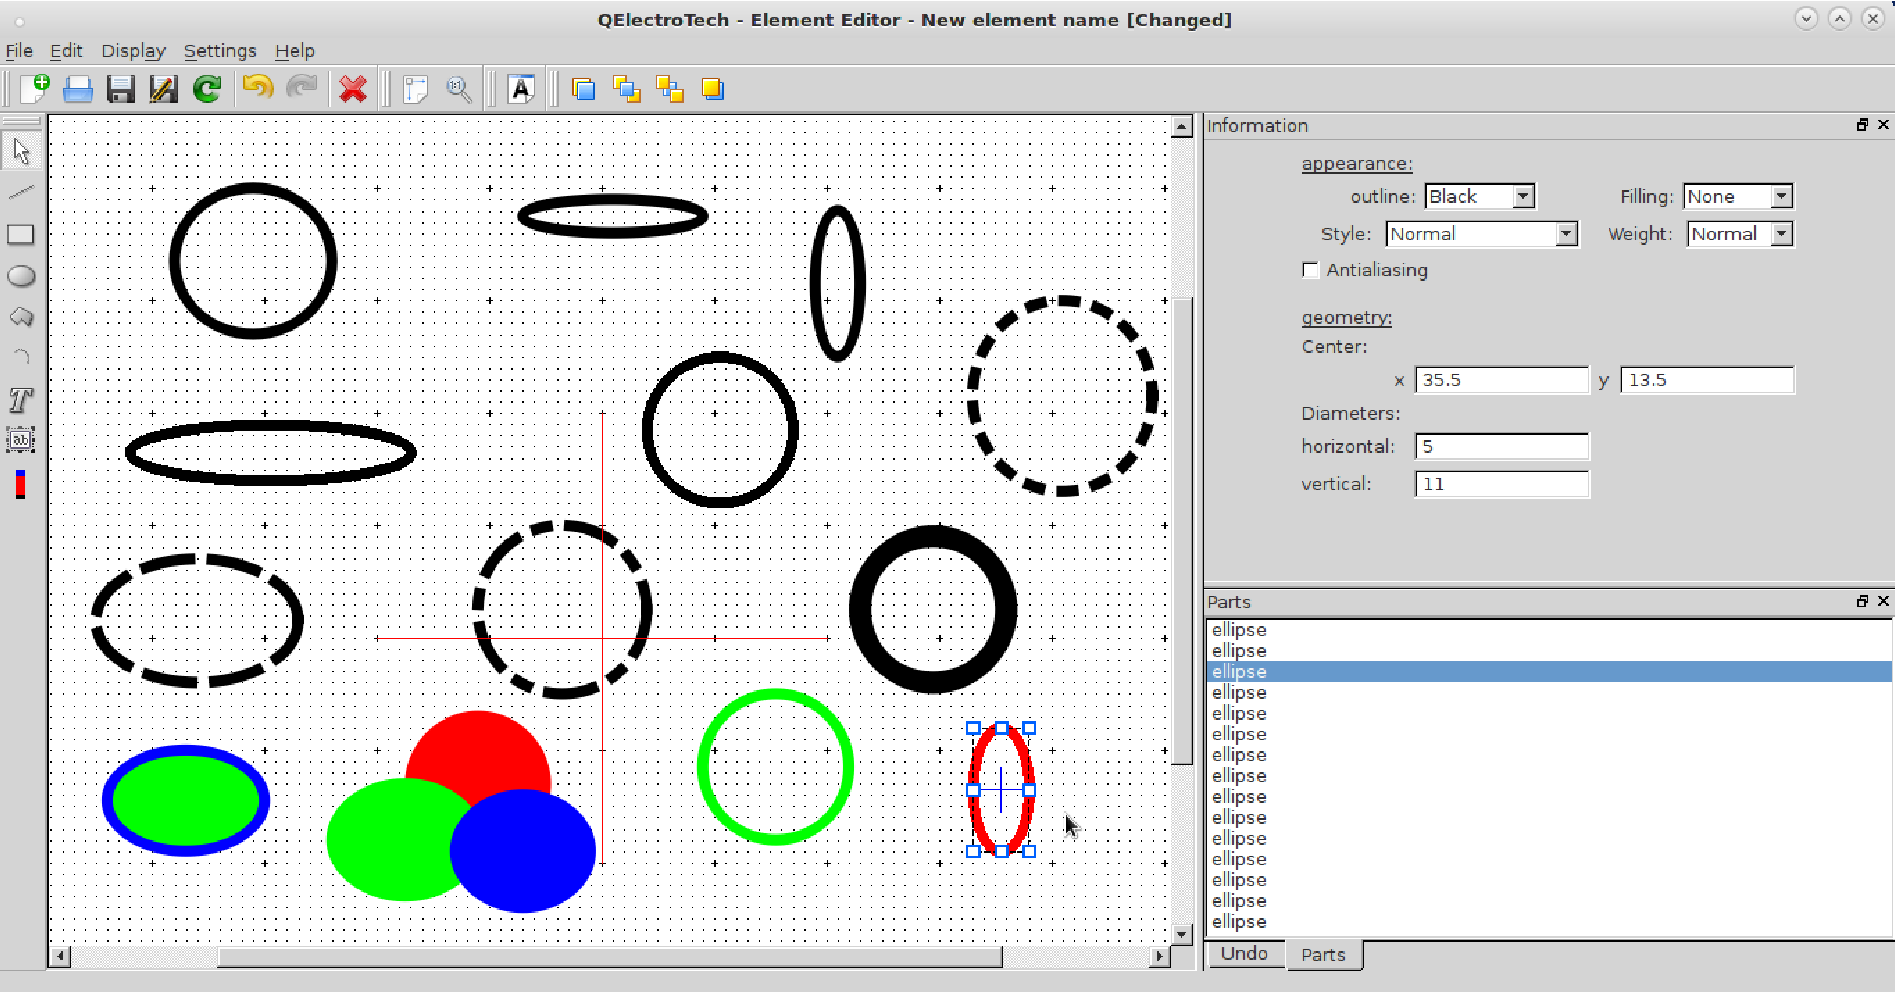 Ellipse tool in QElectroTech